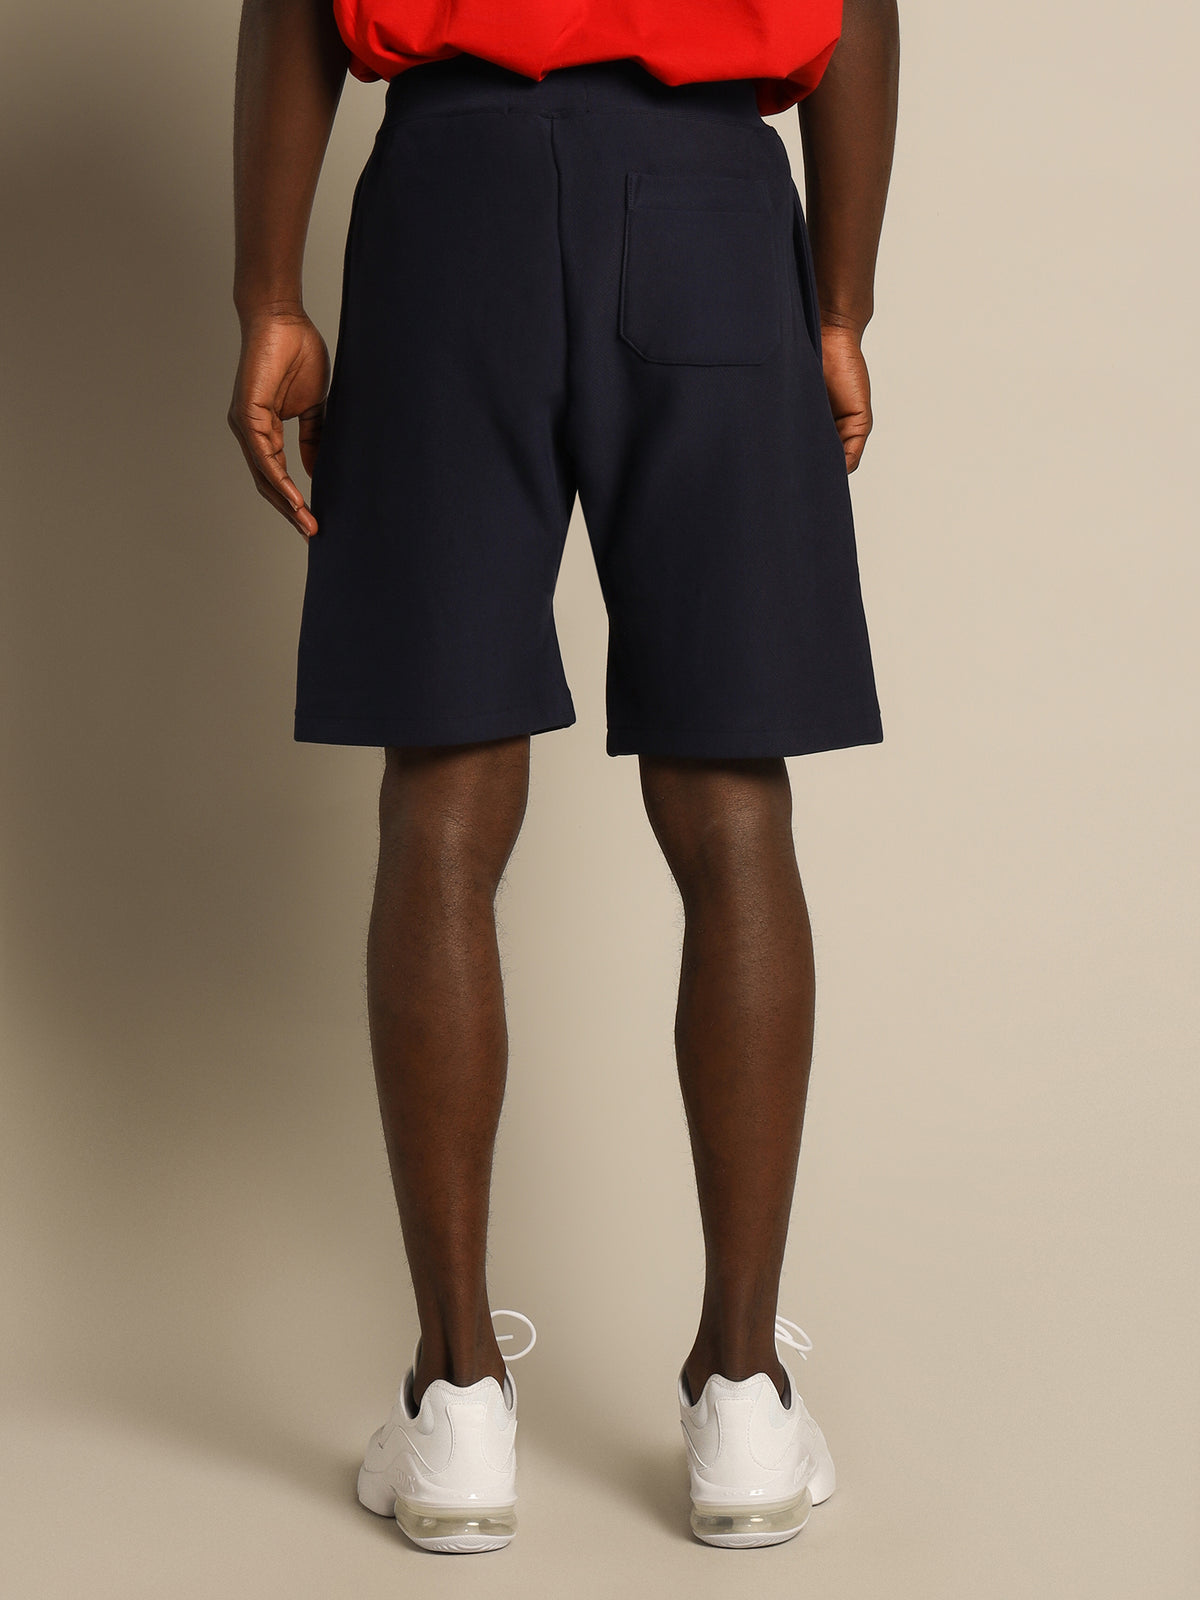 Polo Sport Shorts in Navy